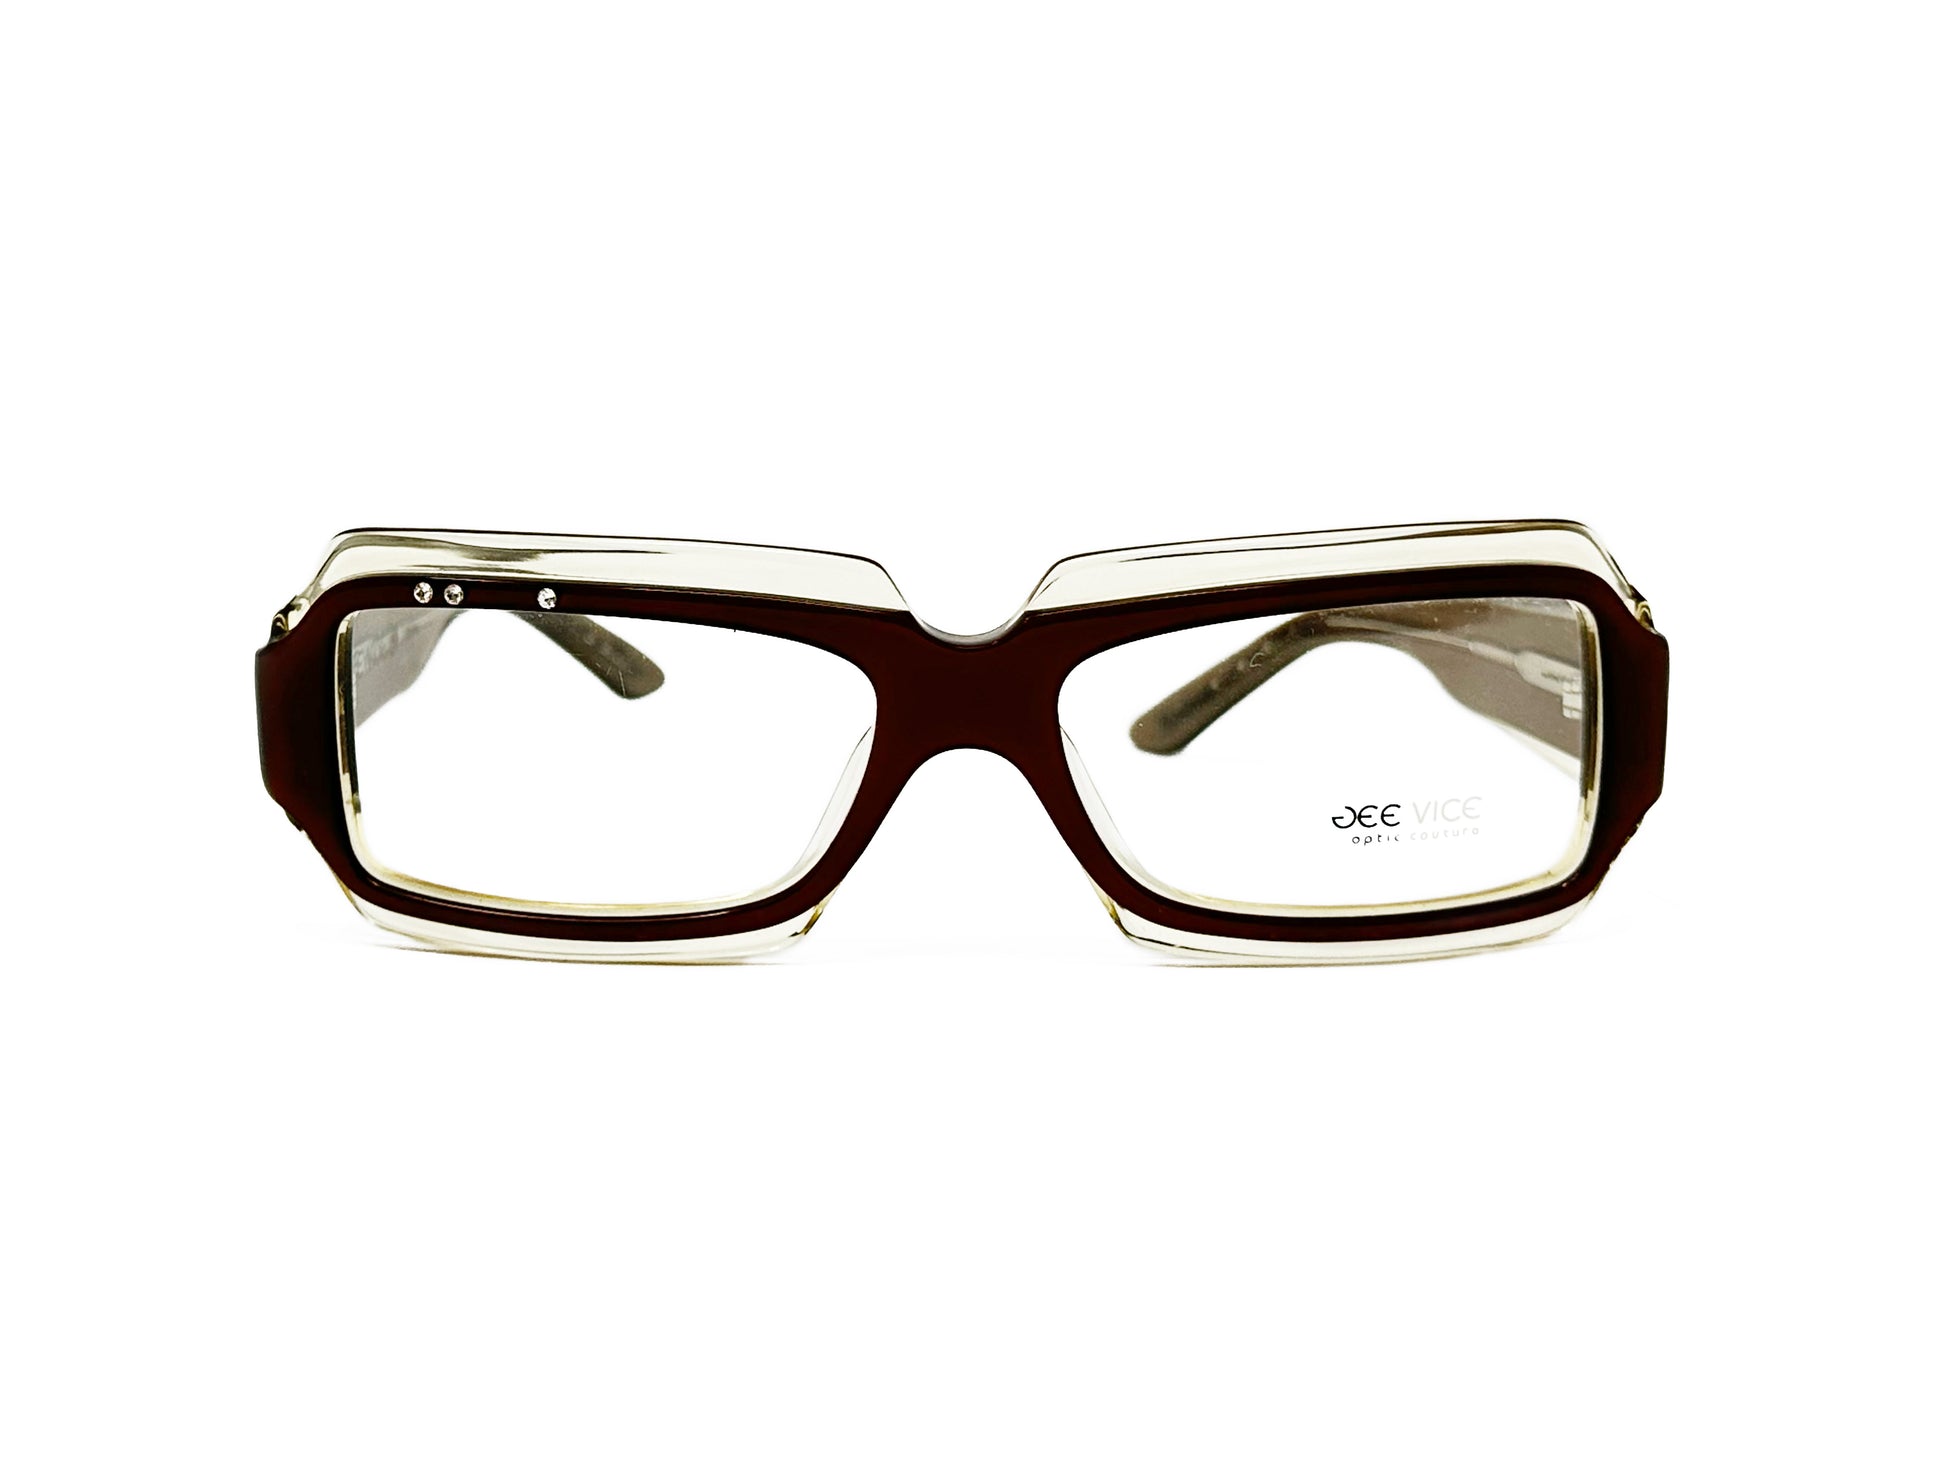 Gee vice rectangular, acetate, optical frame with transparent border. Model: Soiree. Color: Dark Brown and clear transparent. Front view. 